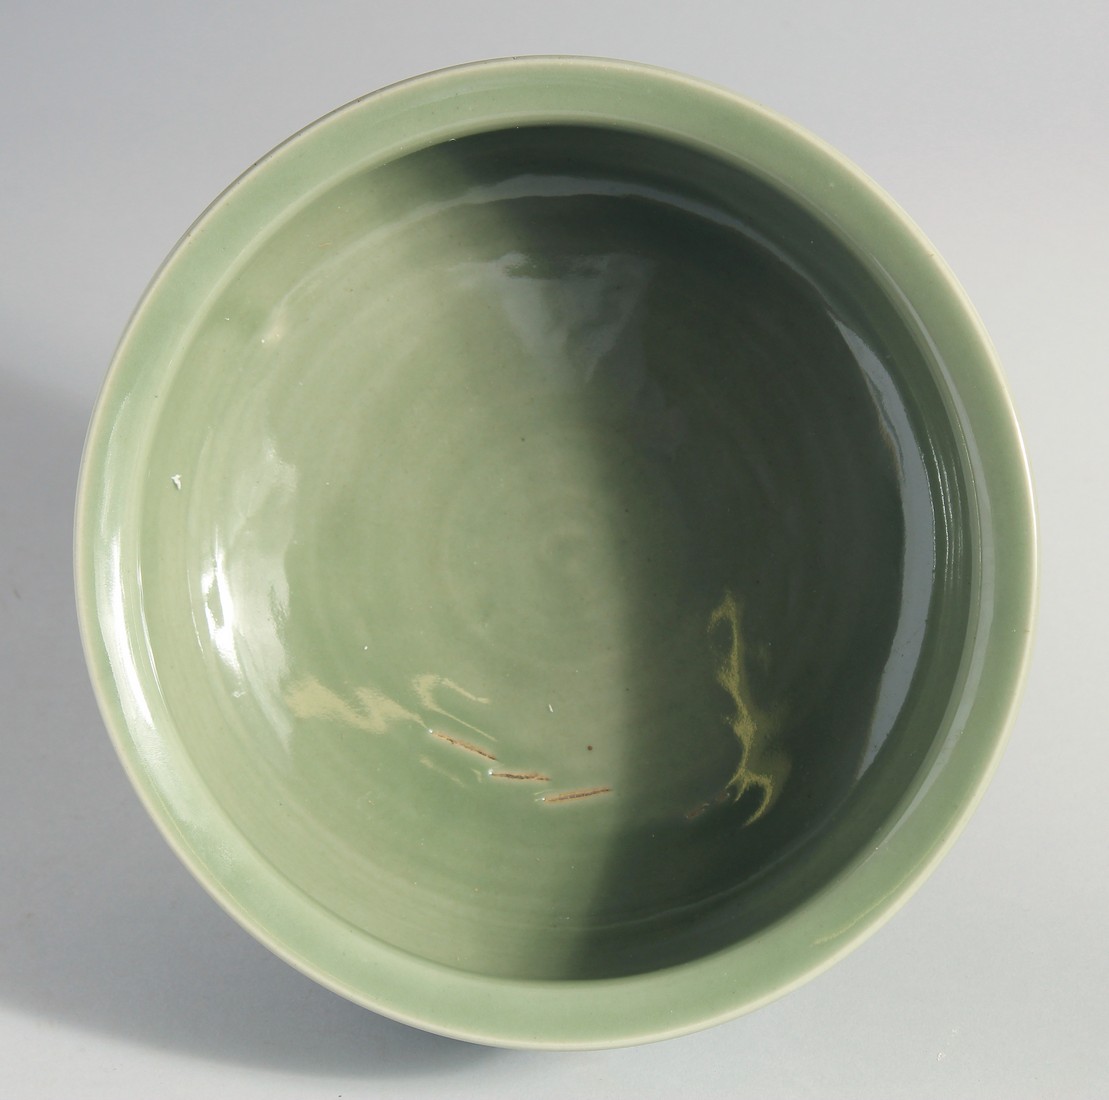 A LARGE CHINESE CELADON GLAZE BOWL, carved with dragon and the flaming pearl of wisdom, 25.5cm - Image 3 of 5